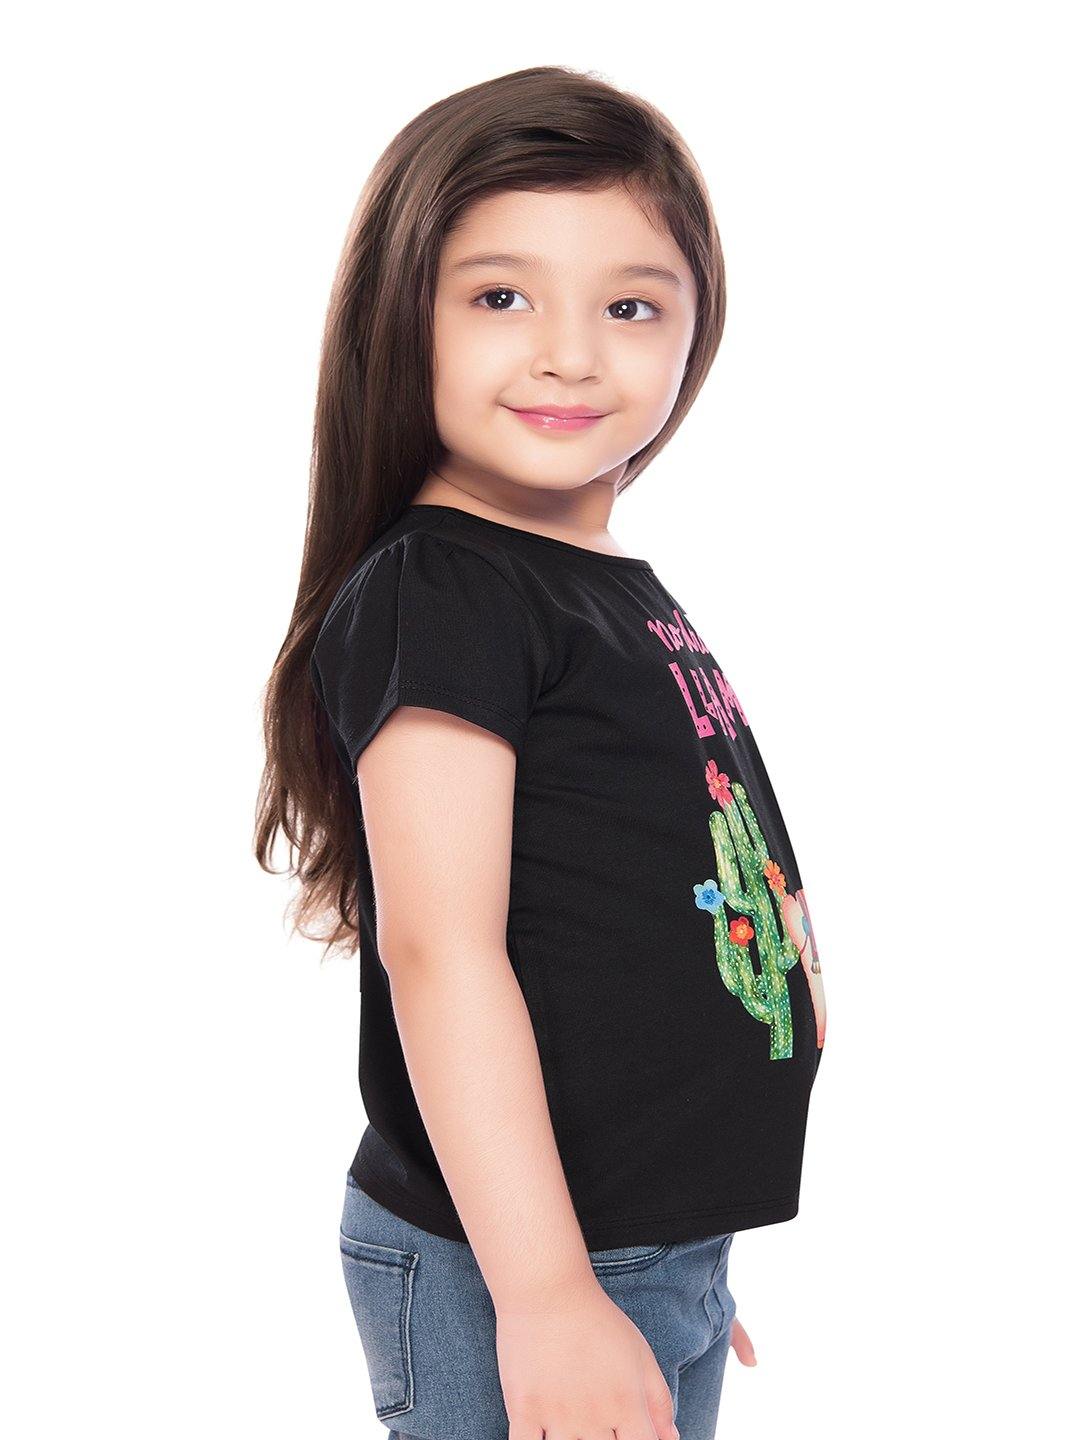 Tiny Baby Black Colored Top - T-111 Black - TINY BABY INDIA shop.tinybaby.in